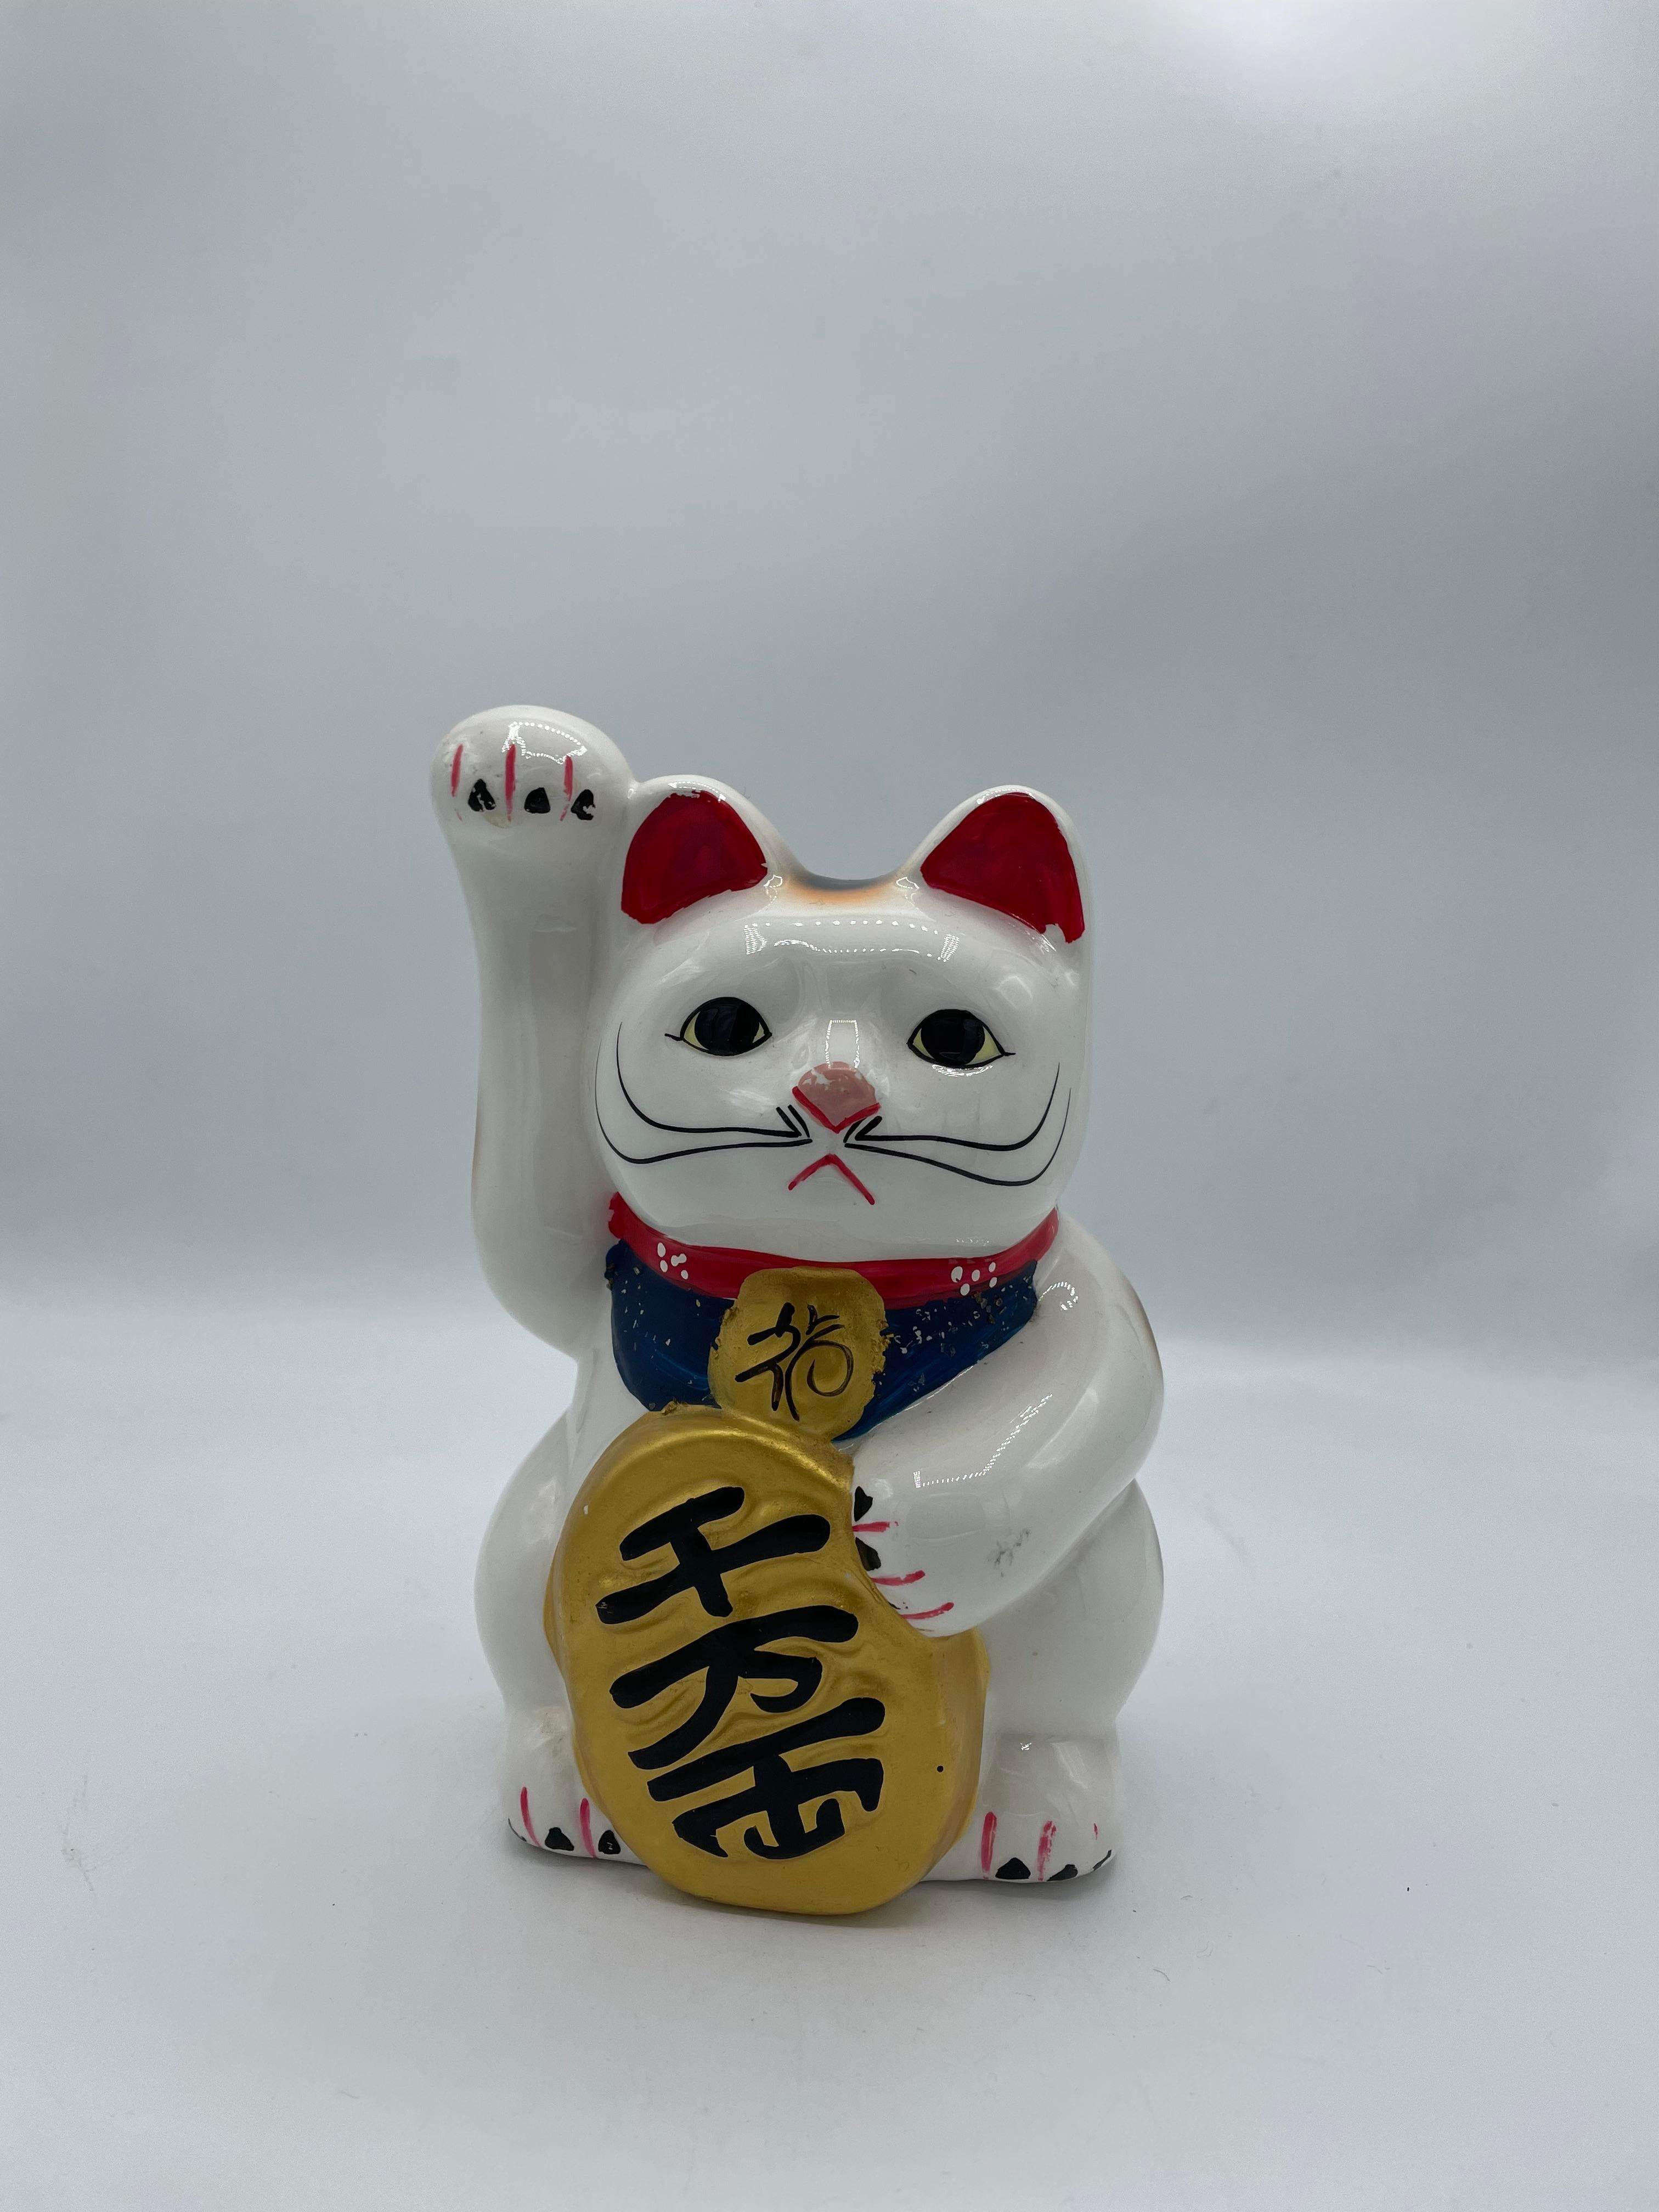 This is a vintage piggy bank of manekineko cat. It is made with porcelain and it was made around 1980s in Showa era.

The maneki-neko is a common Japanese figurine which is often believed to bring good luck to the owner. In modern times, they are